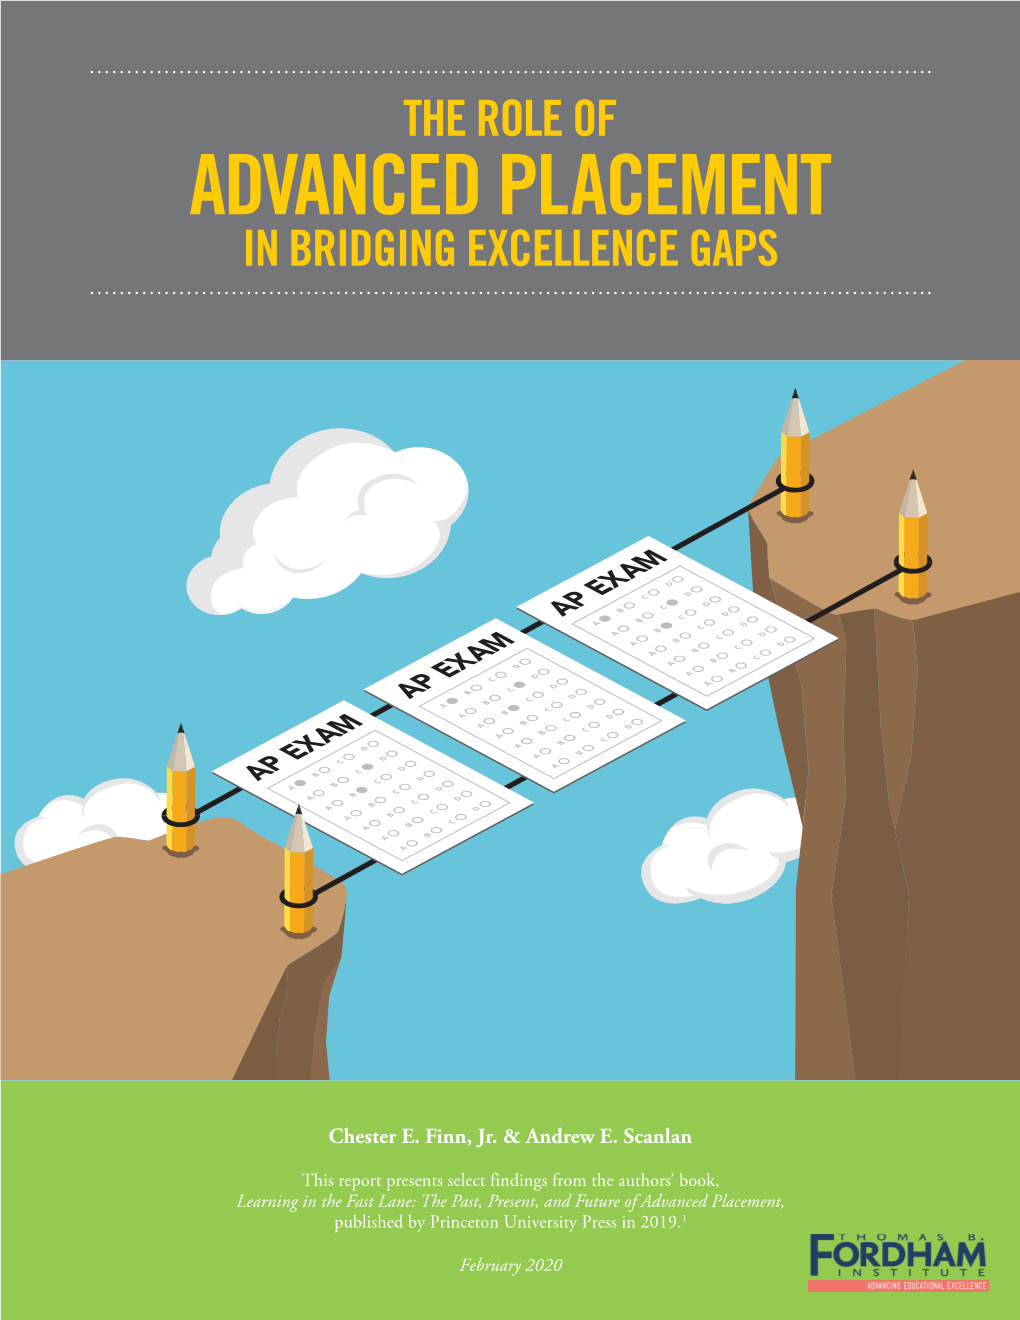 Advanced Placement in Bridging Excellence Gaps